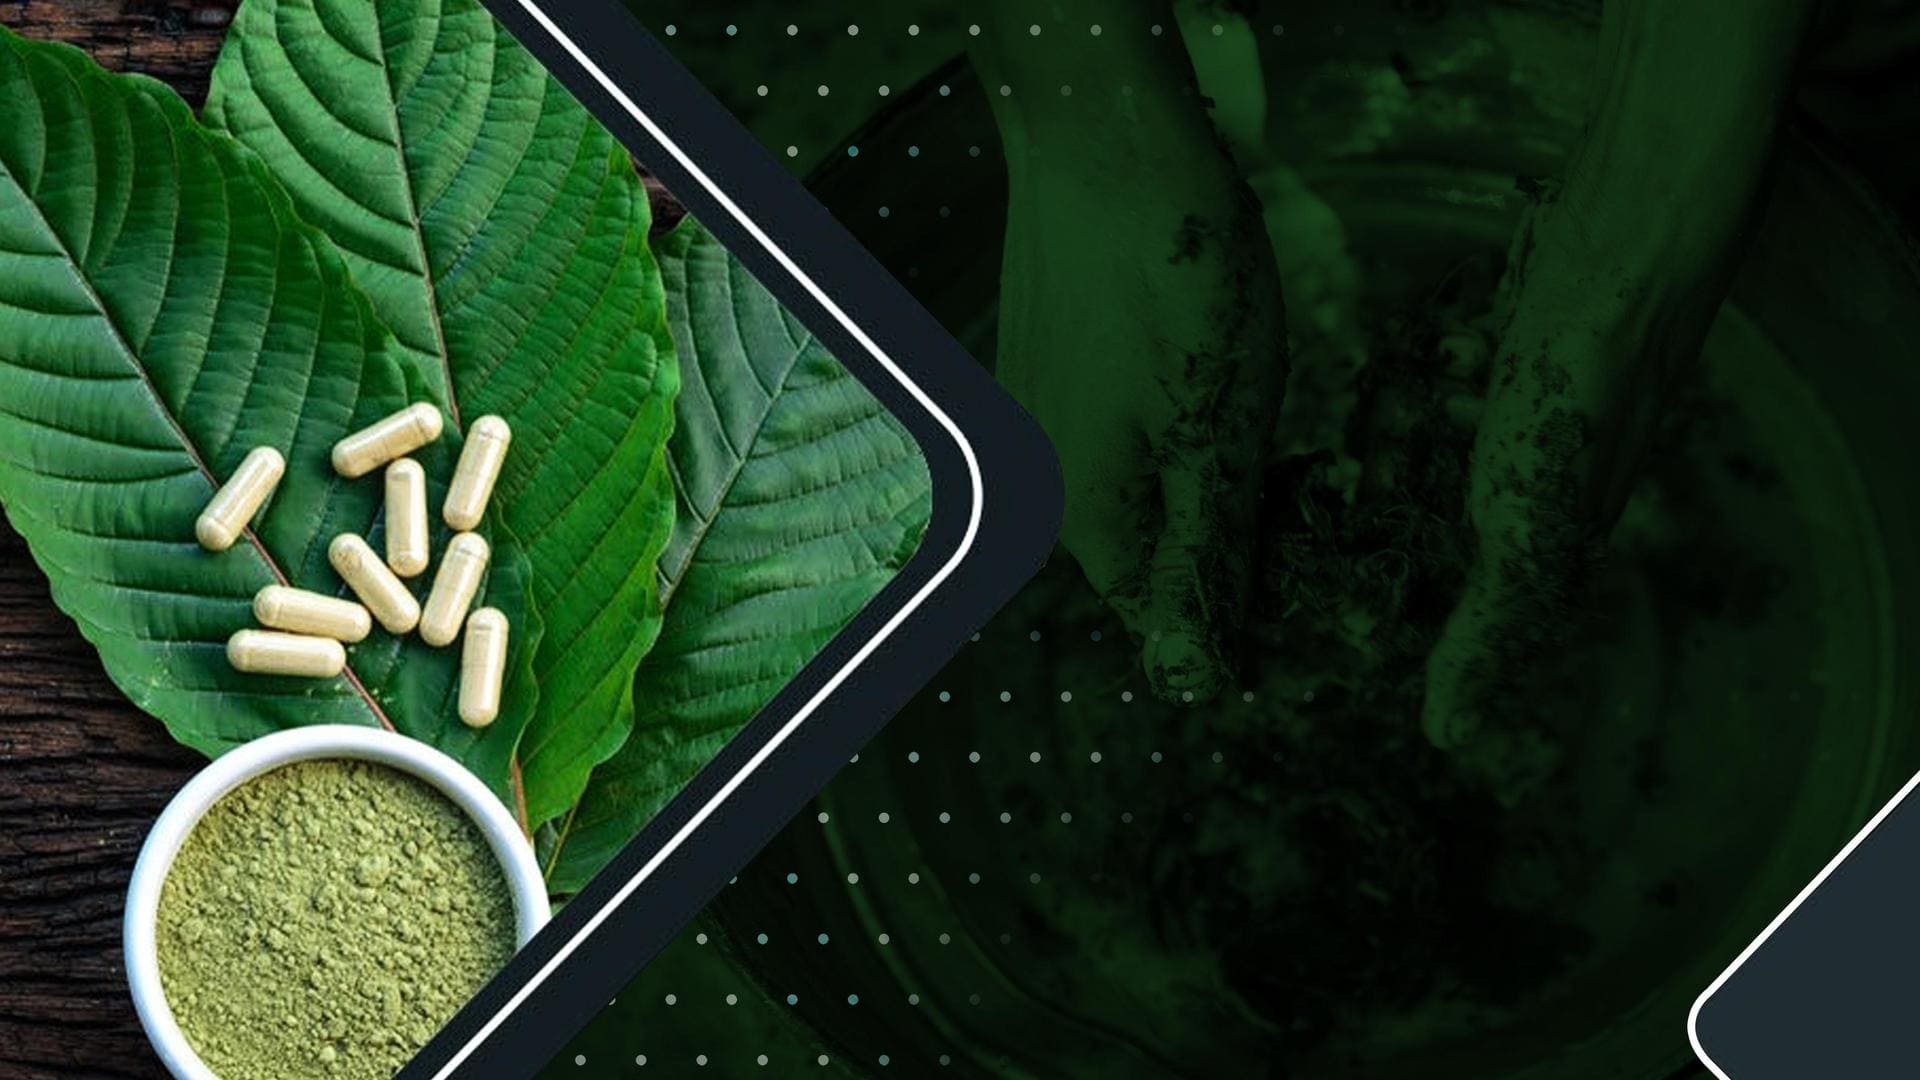 Heard of Kratom? It's a herbal extract with many benefits